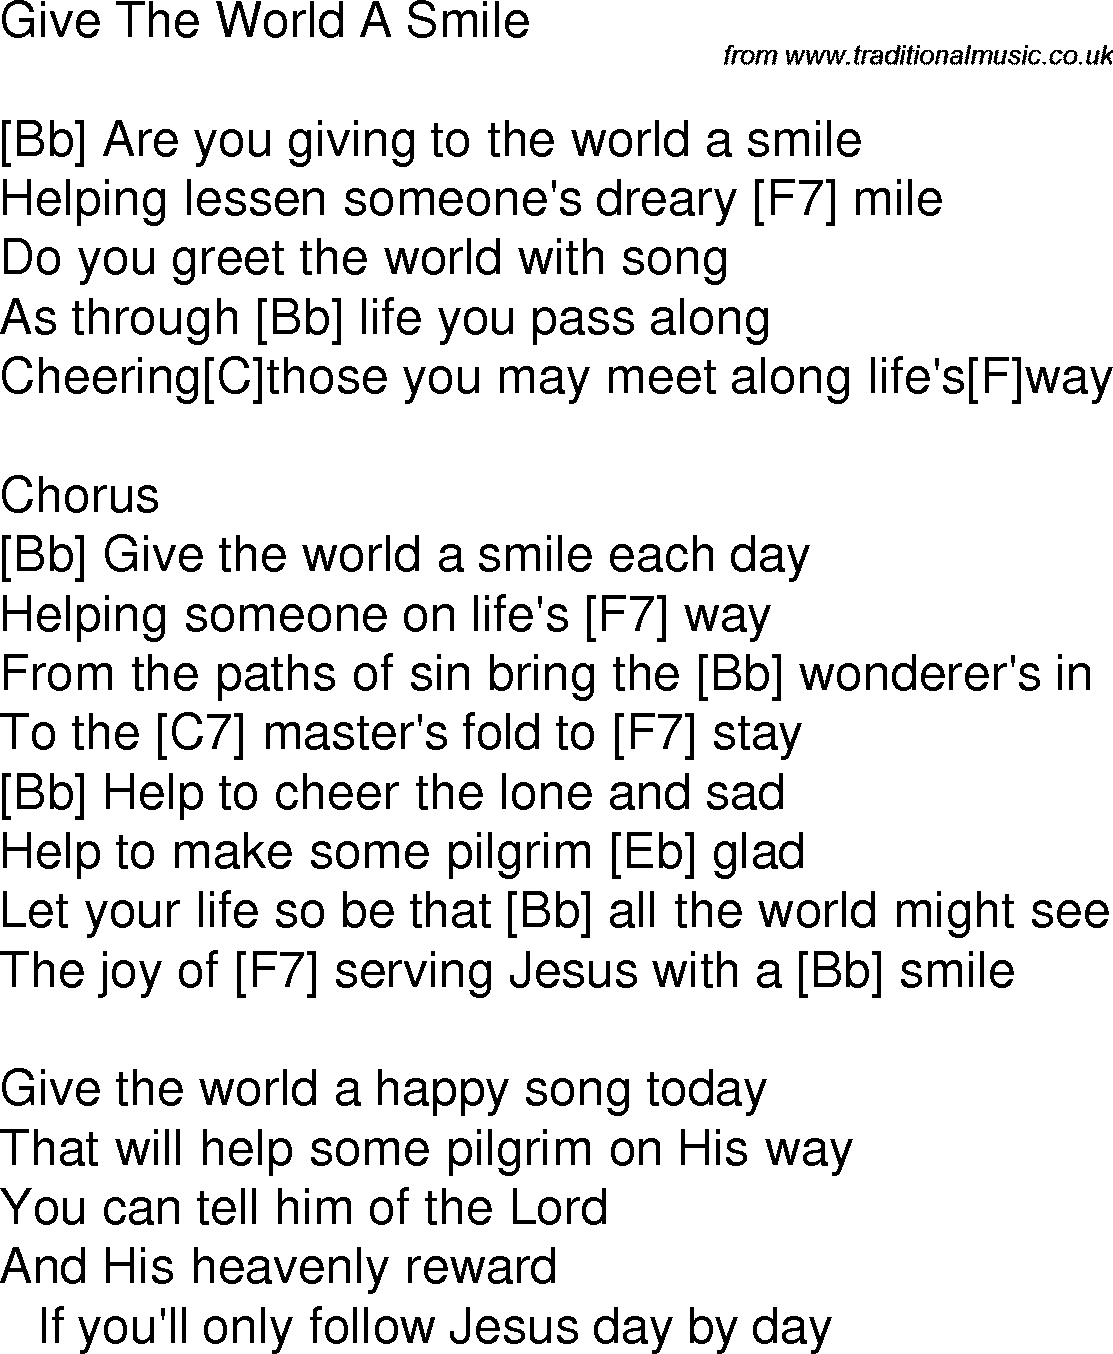 Old time song lyrics with chords for Give The World A Smile Bb